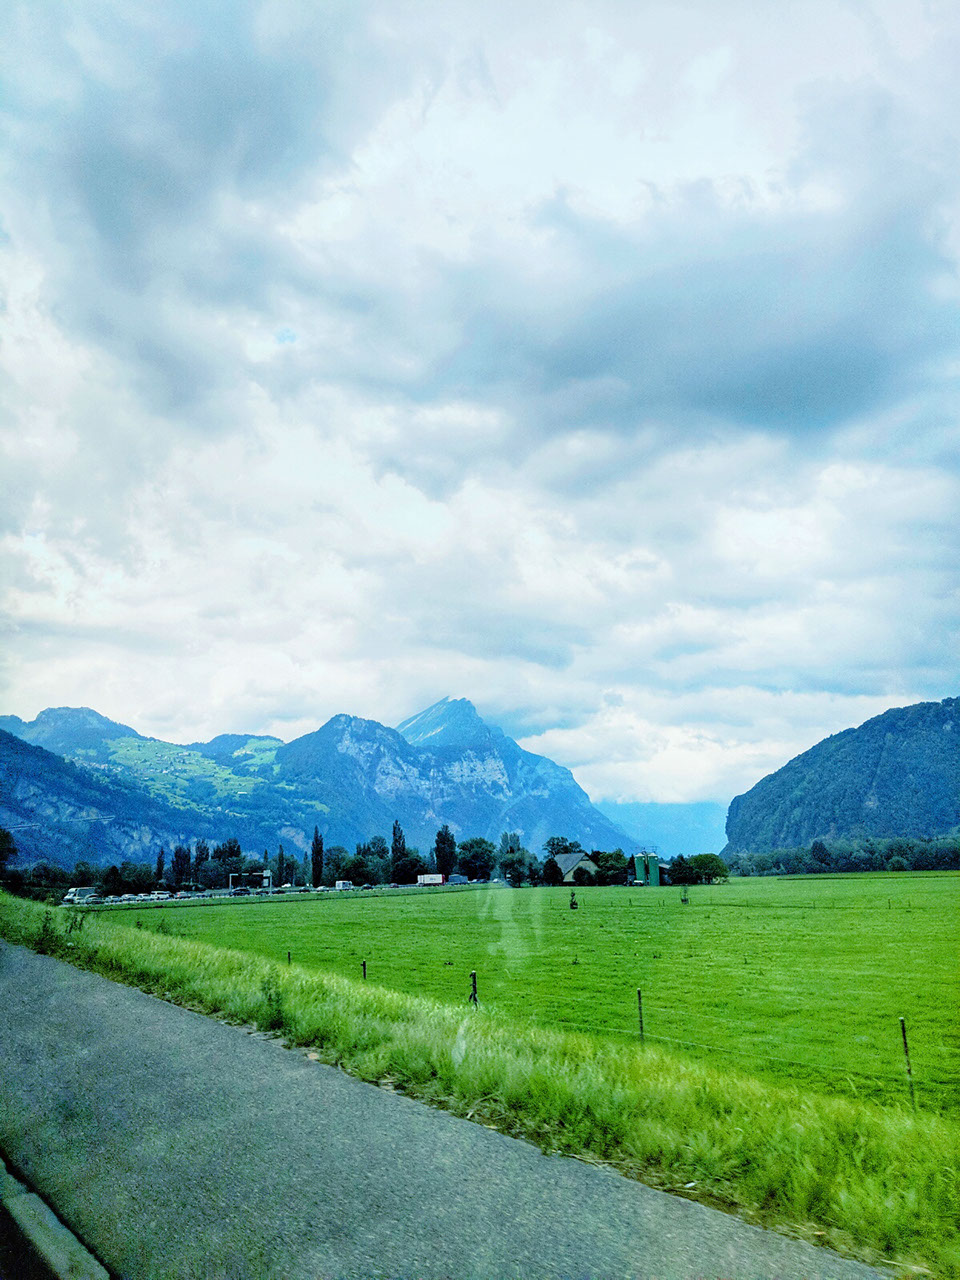 Switzerland's Alps mountains and lush landscape are incredible for road-trippers